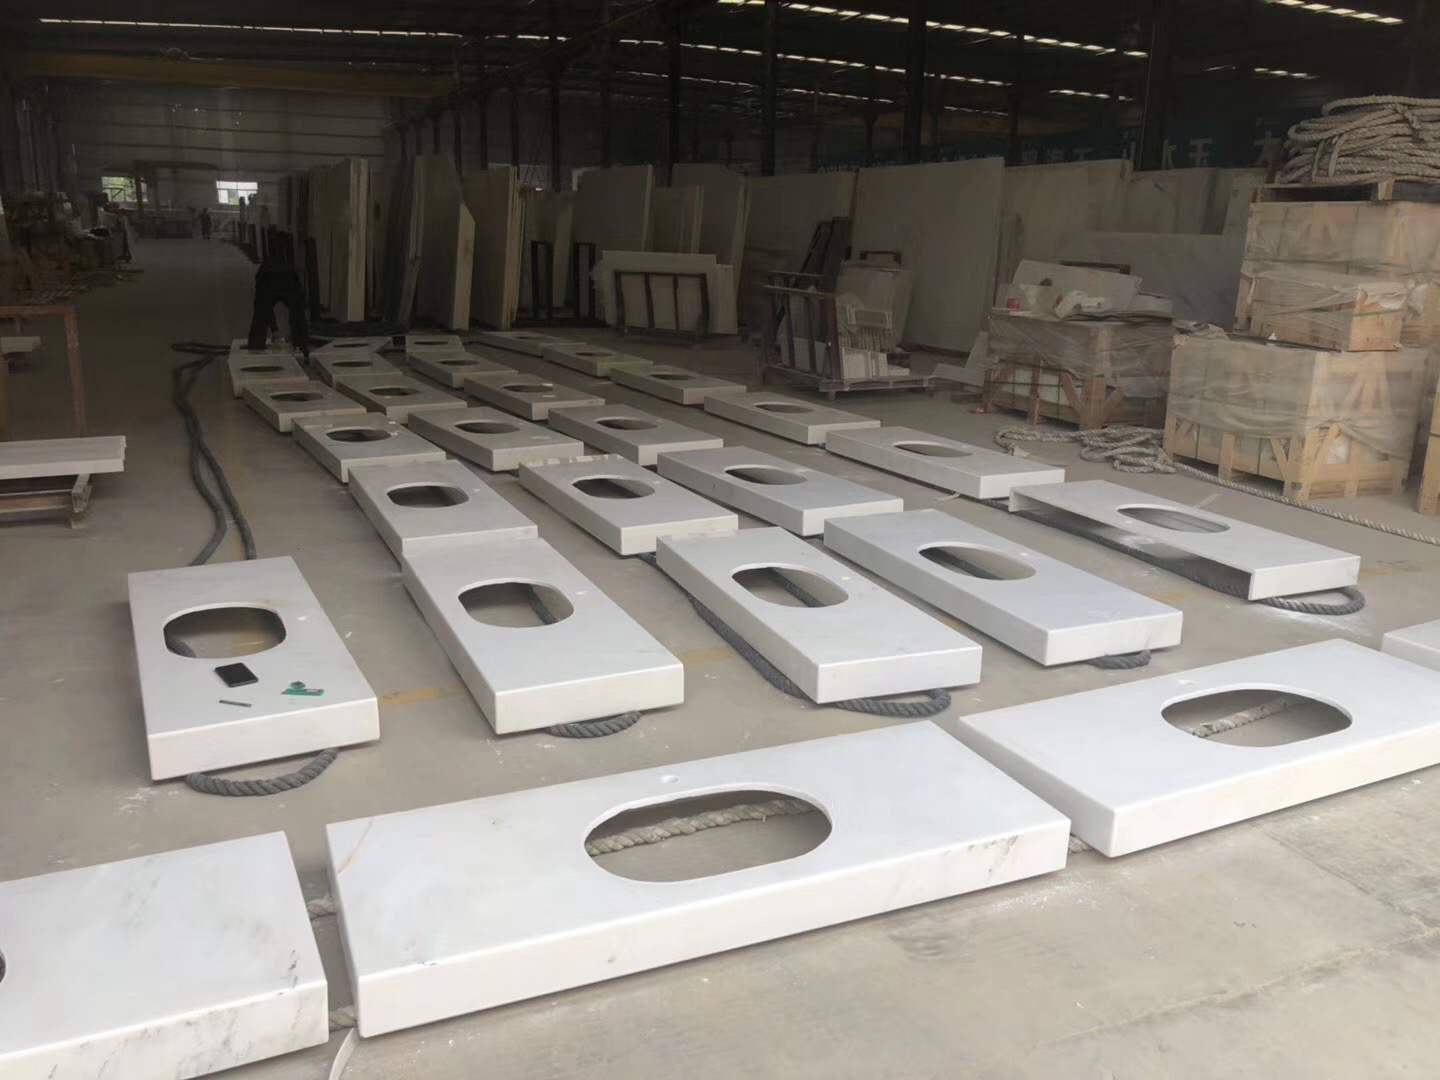 Pure White Jade Cut to Size Tile